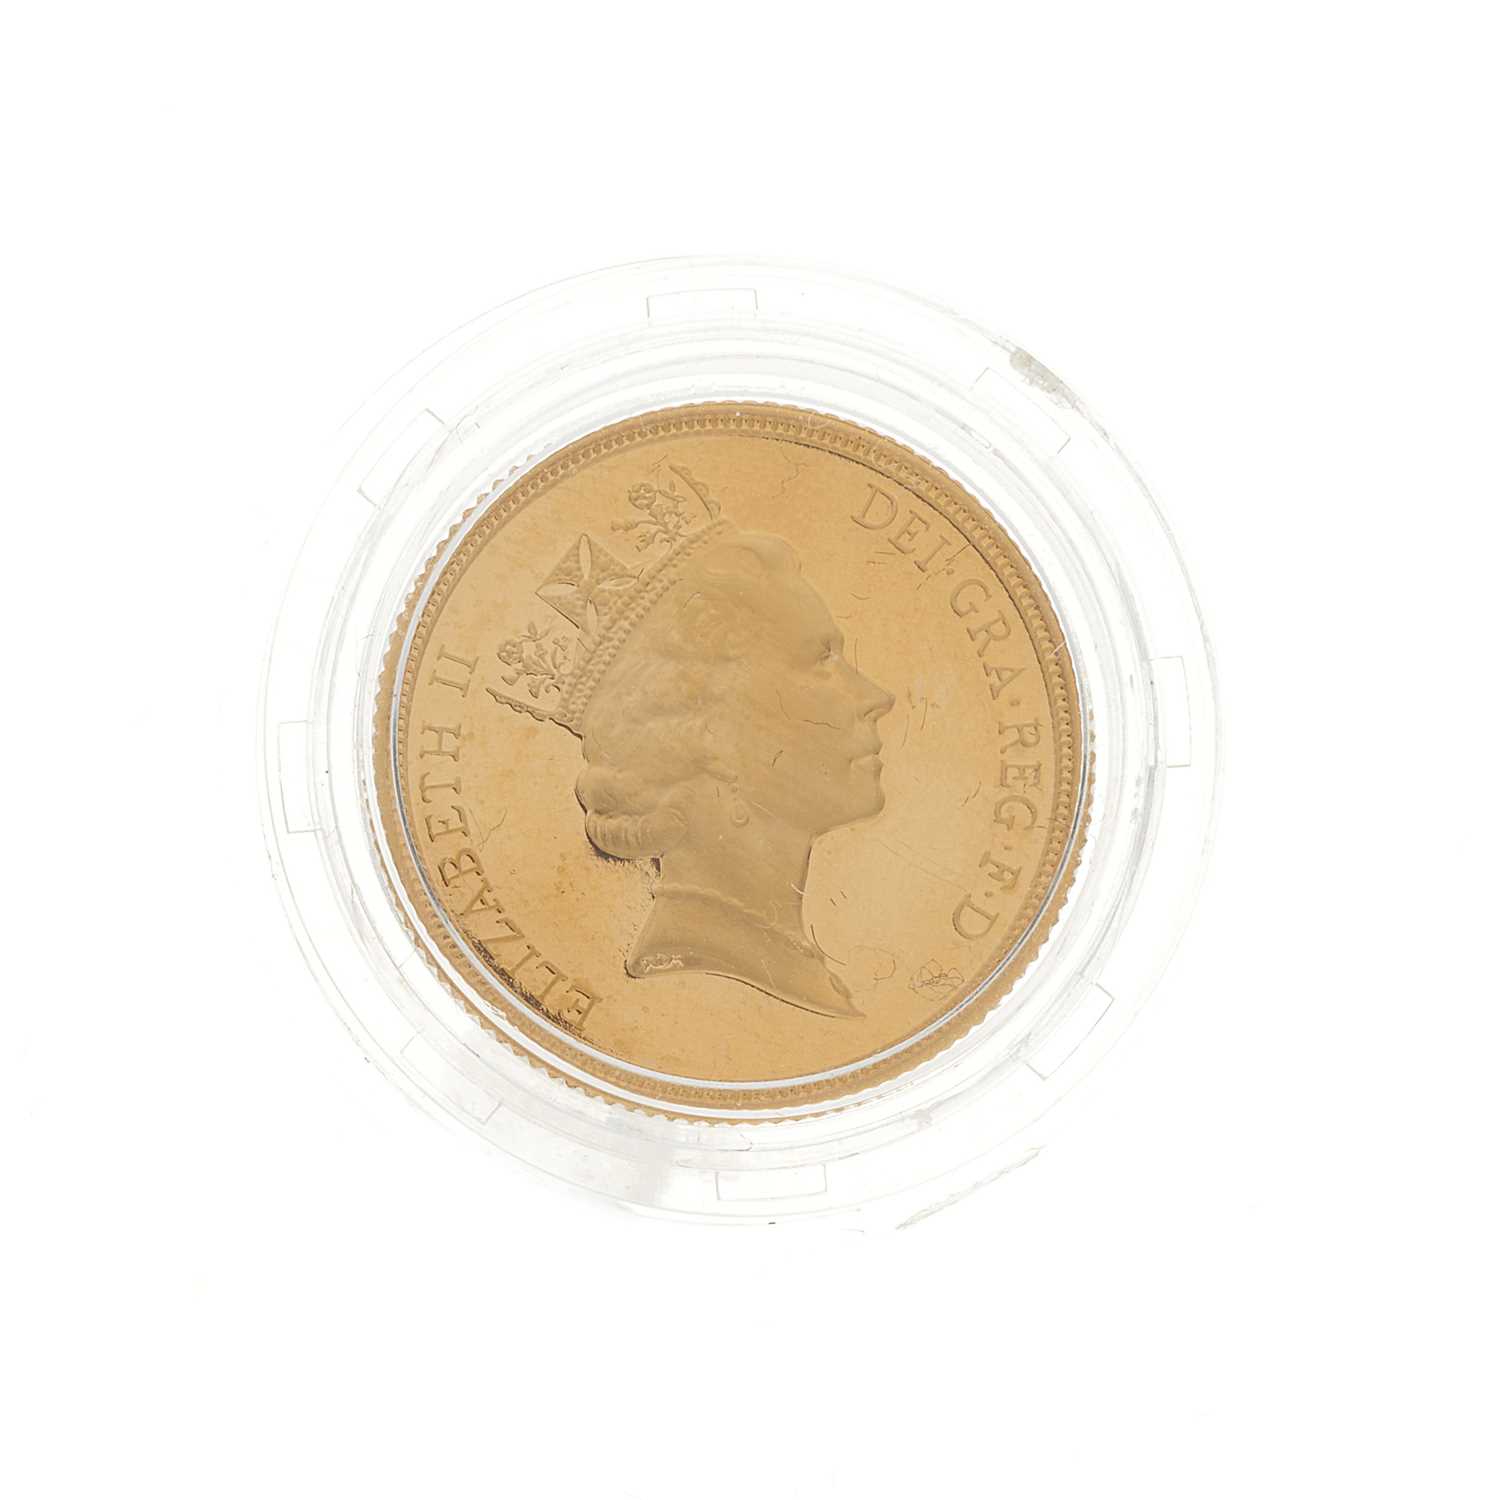 72 - Elizabeth II, a 1997 gold proof full sovereign coin